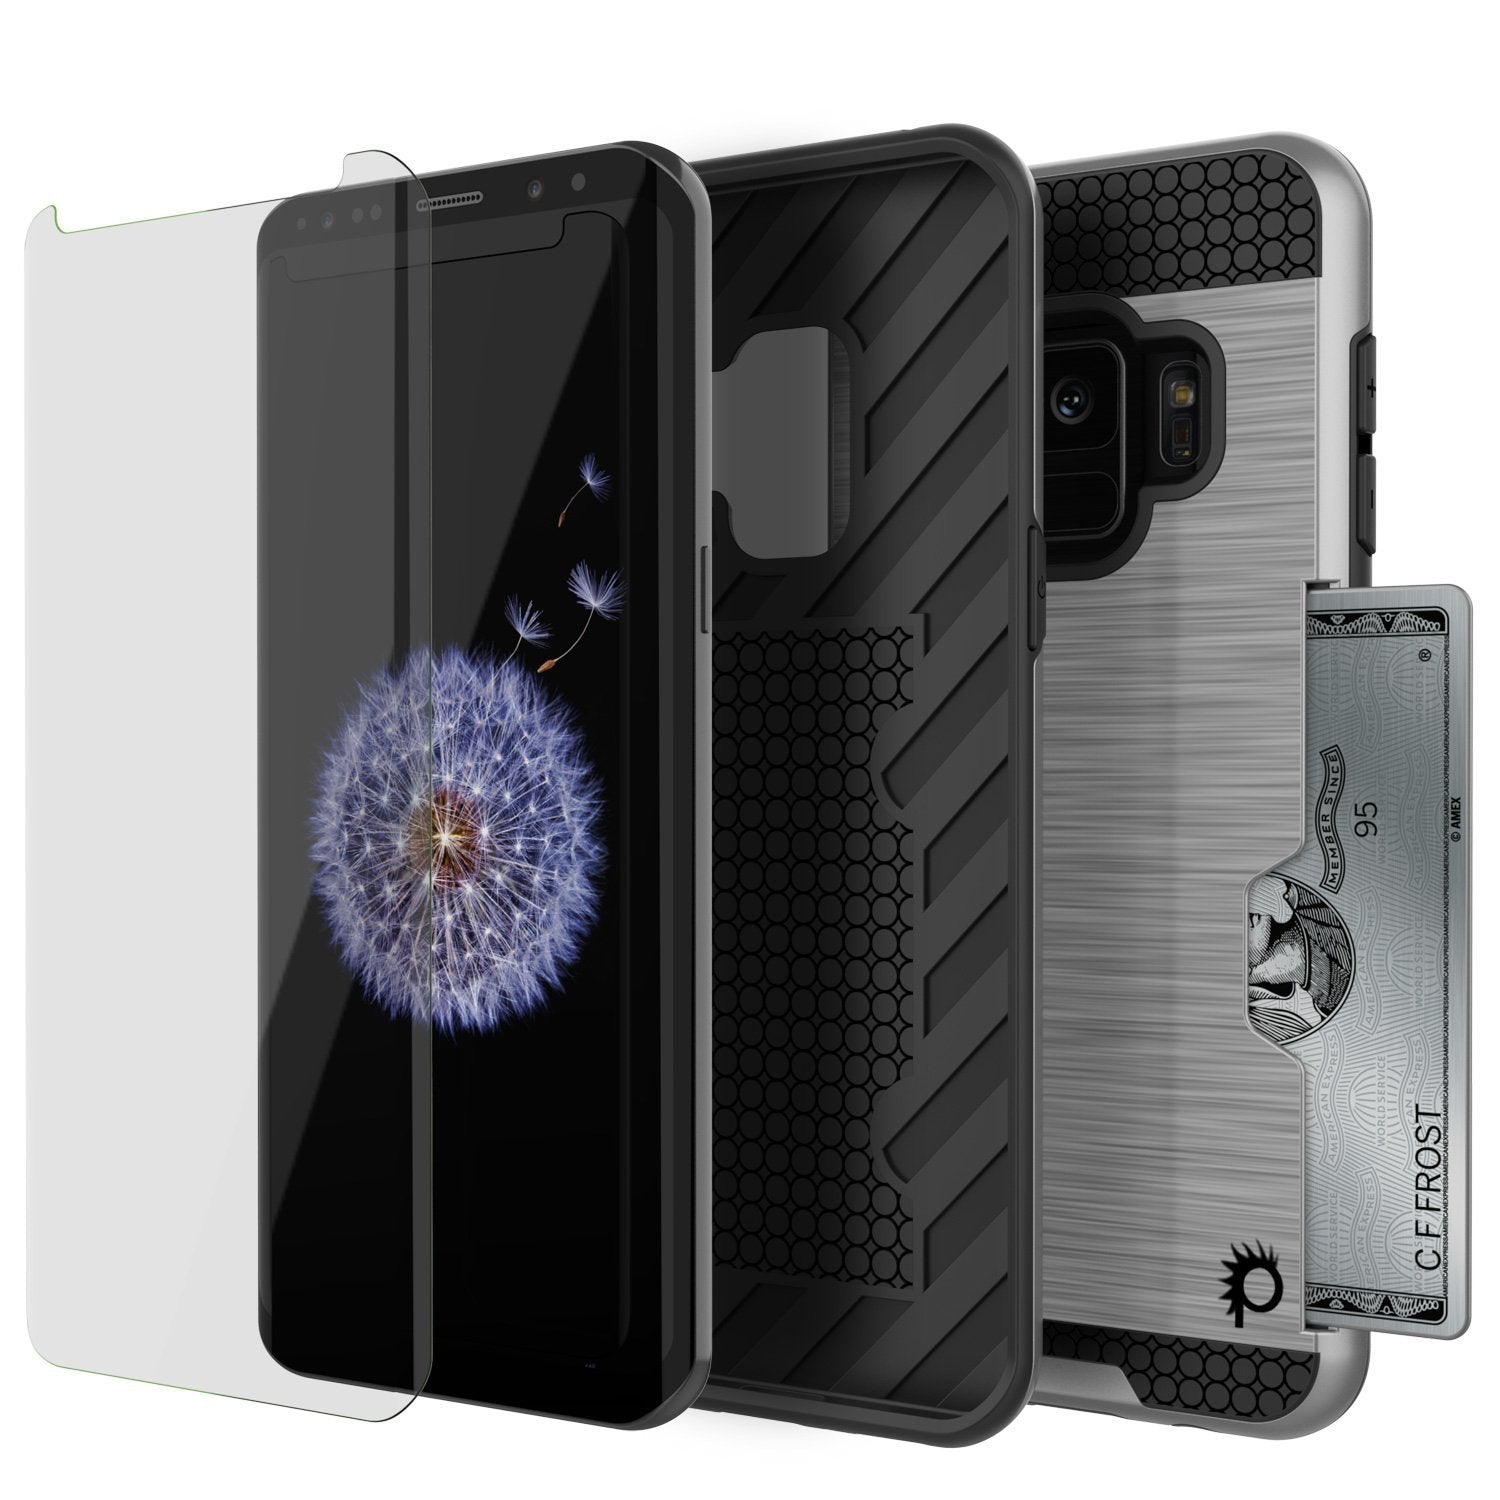 Galaxy S9 case, Punkcase SLOT Series Dual-Layer Cover [Silver]